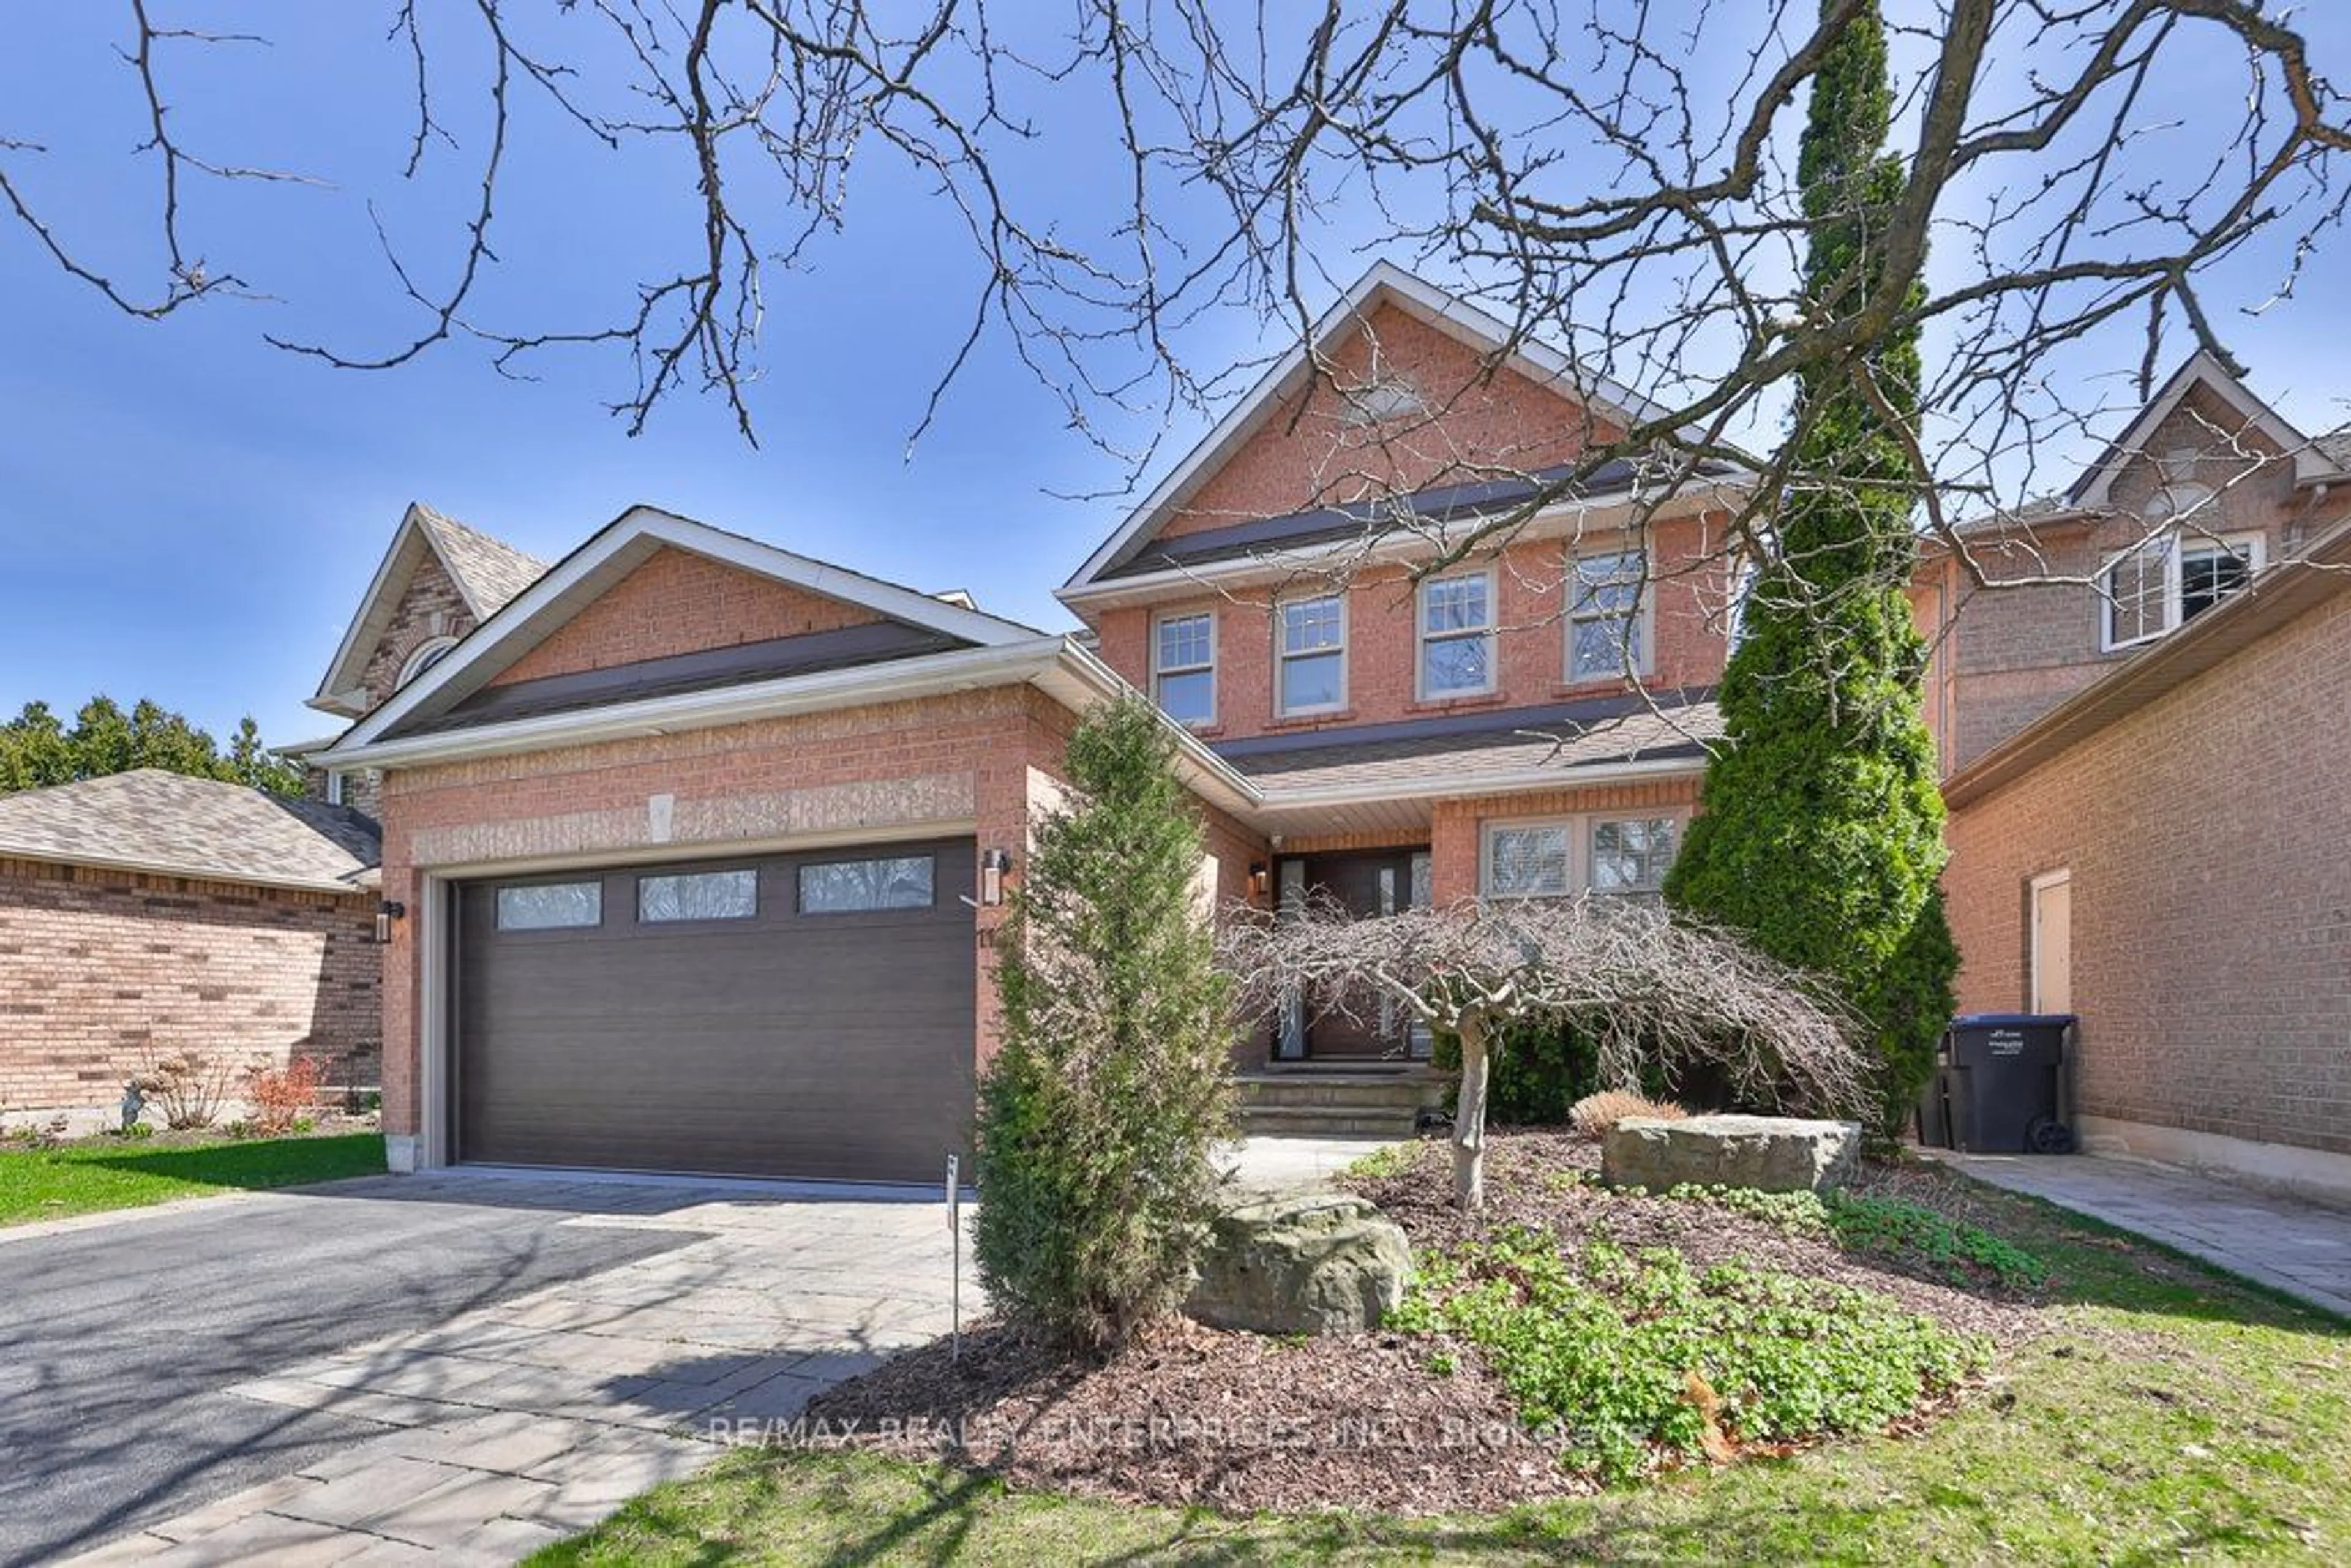 Home with brick exterior material for 1127 Queen St, Mississauga Ontario L5H 4K1